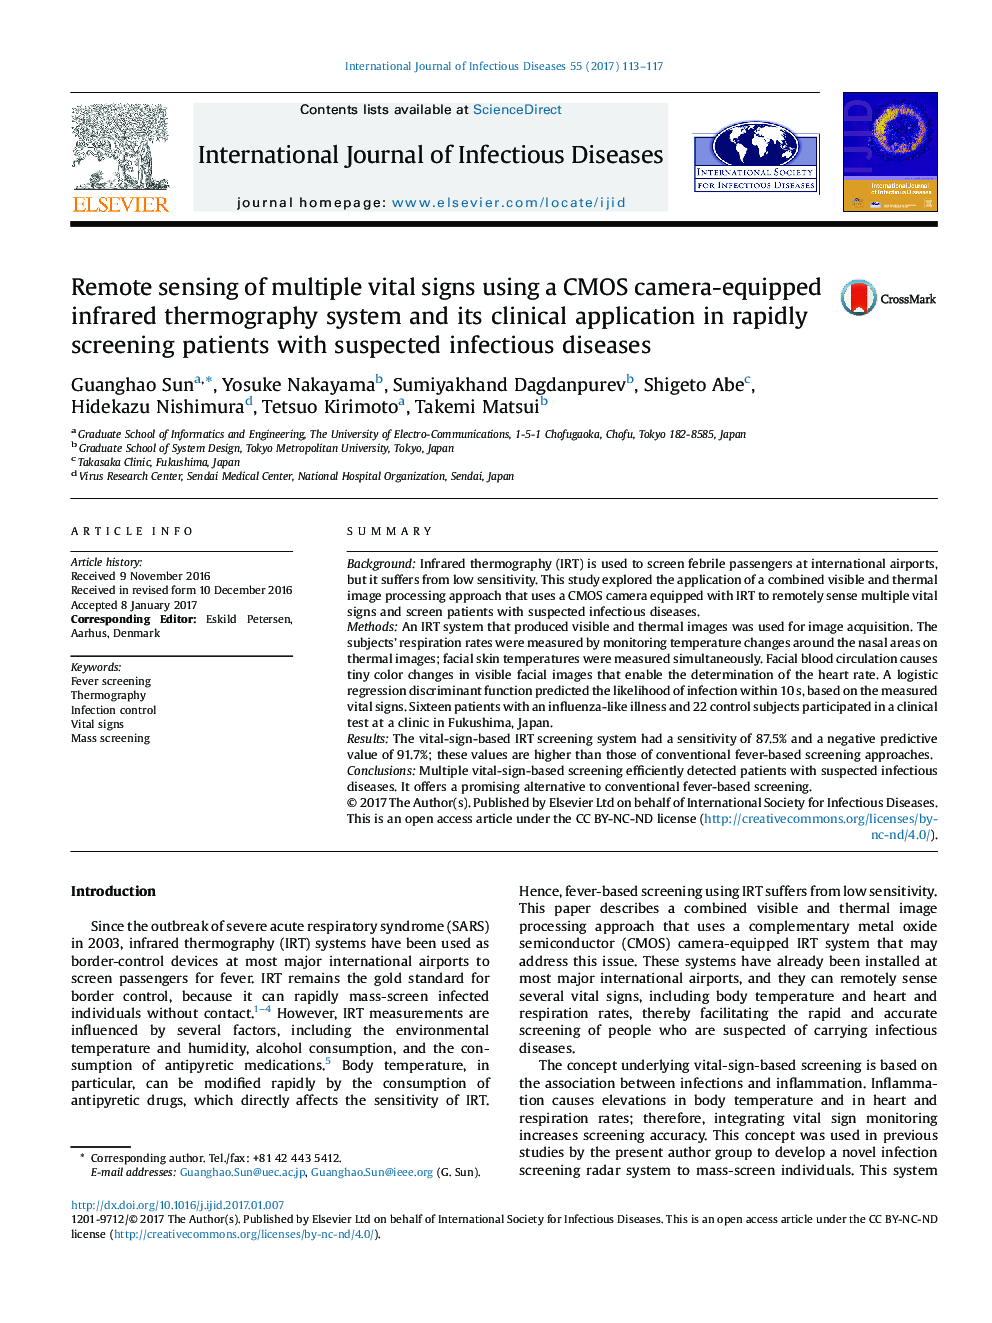 Remote sensing of multiple vital signs using a CMOS camera-equipped infrared thermography system and its clinical application in rapidly screening patients with suspected infectious diseases